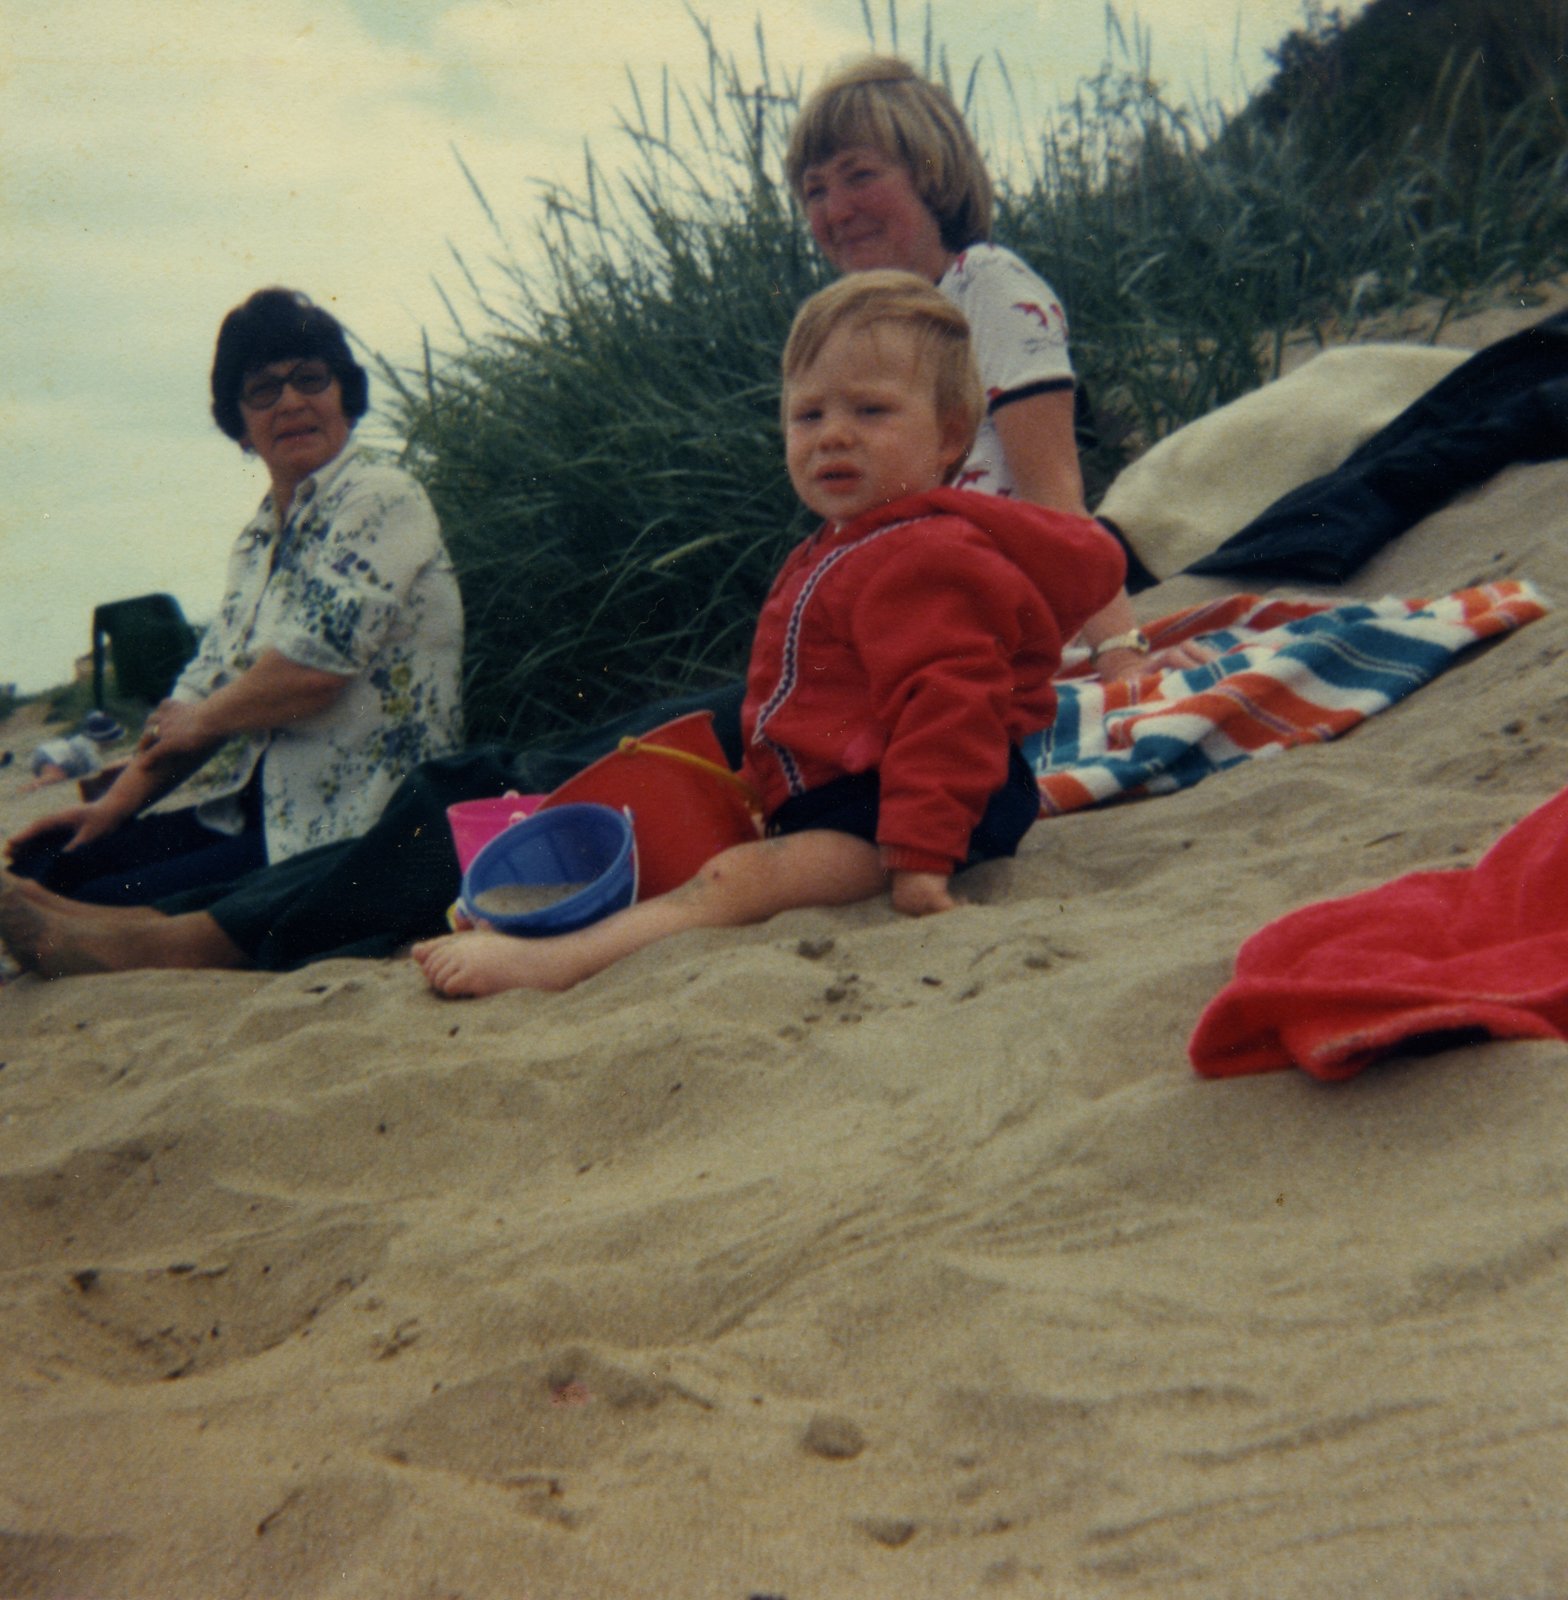 Stewart, the youngest son of Vincent and Marie Campbell, photographed on a beach in Dublin. Marie and Elizabeth, his mother and grandmother, are pictured in the background.